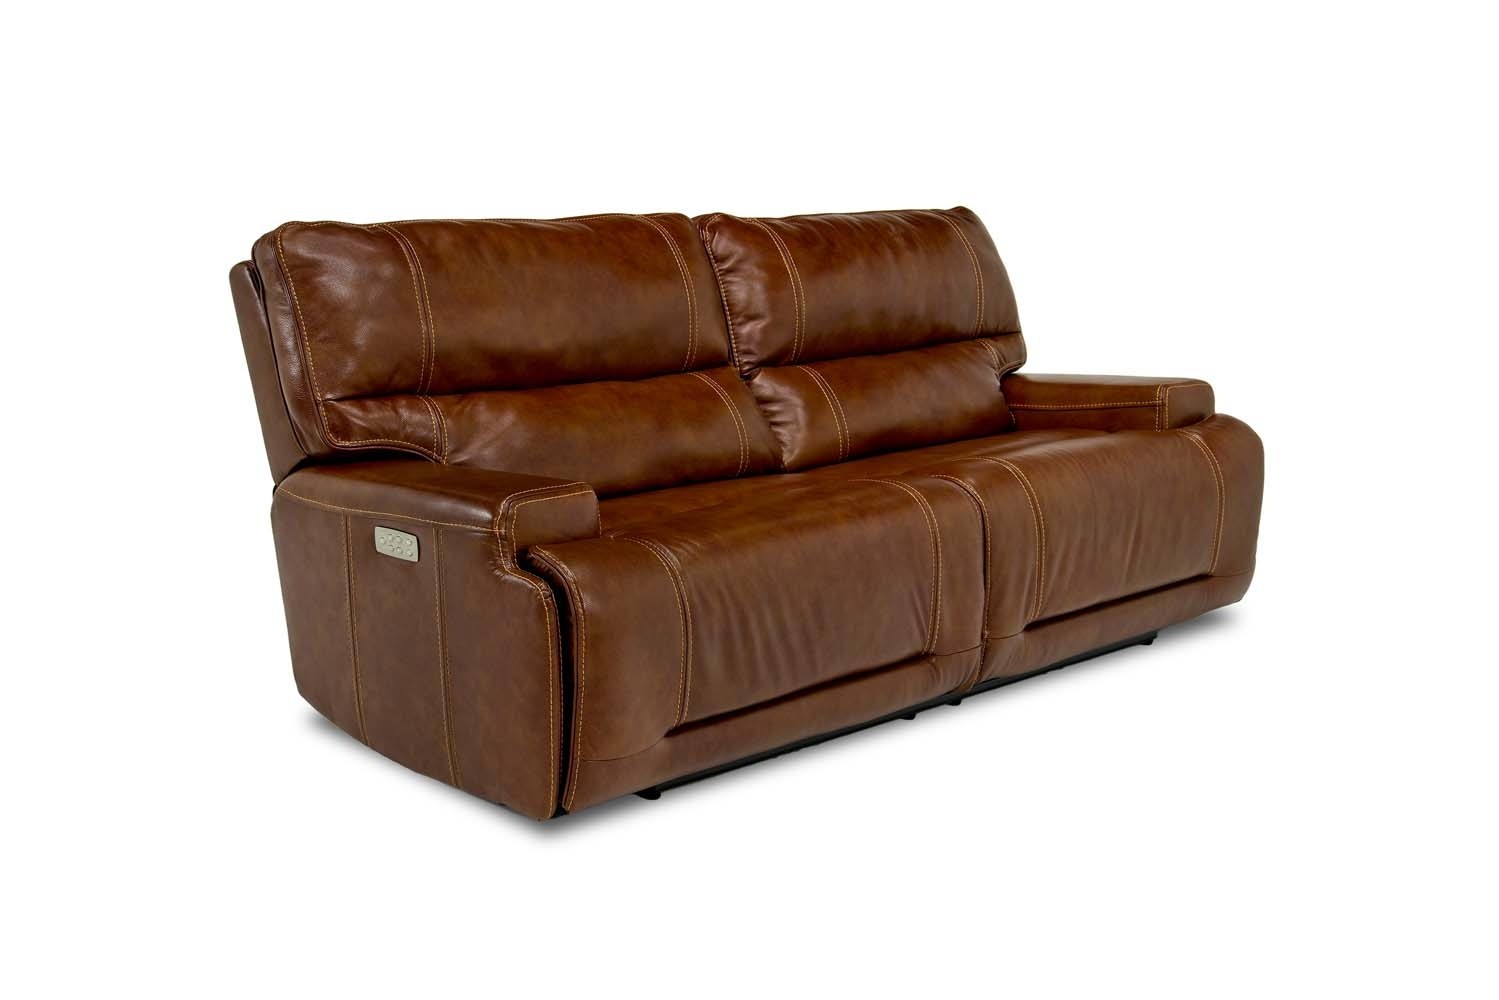 mor furniture sofa and loveseat power leather